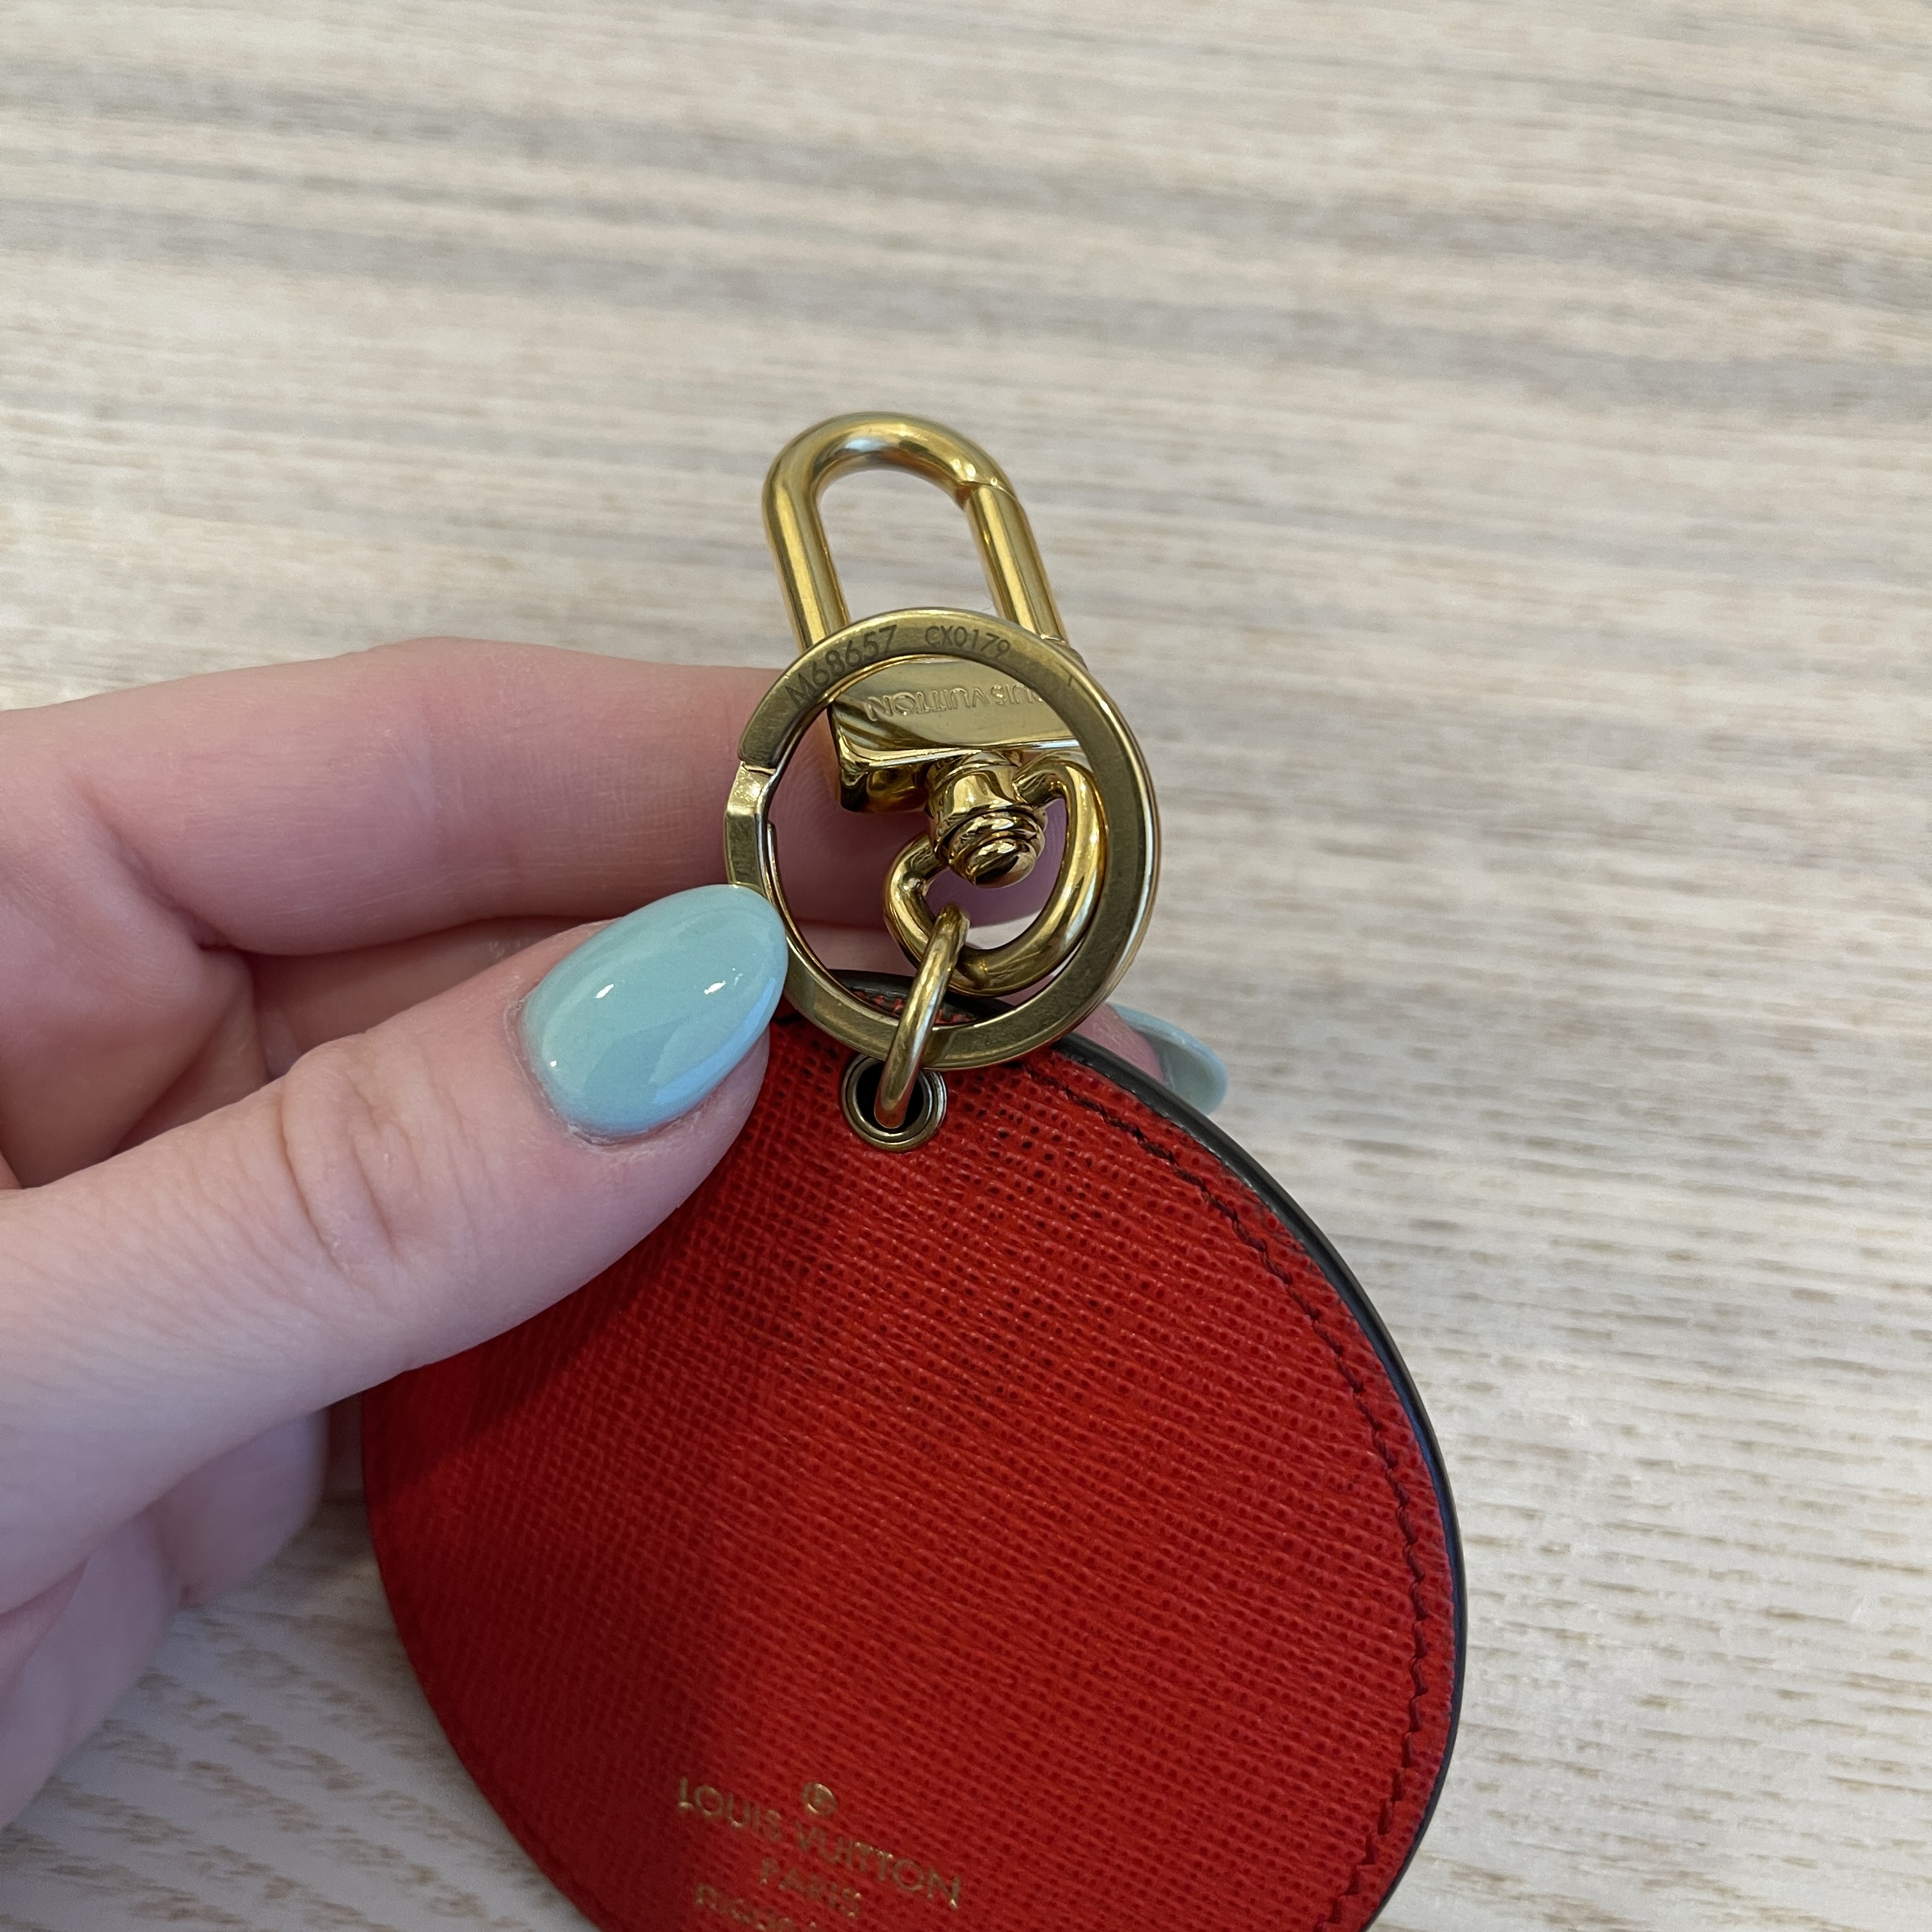 Louis Vuitton, Accessories, Used Lv Very Bag Charm Key Holder